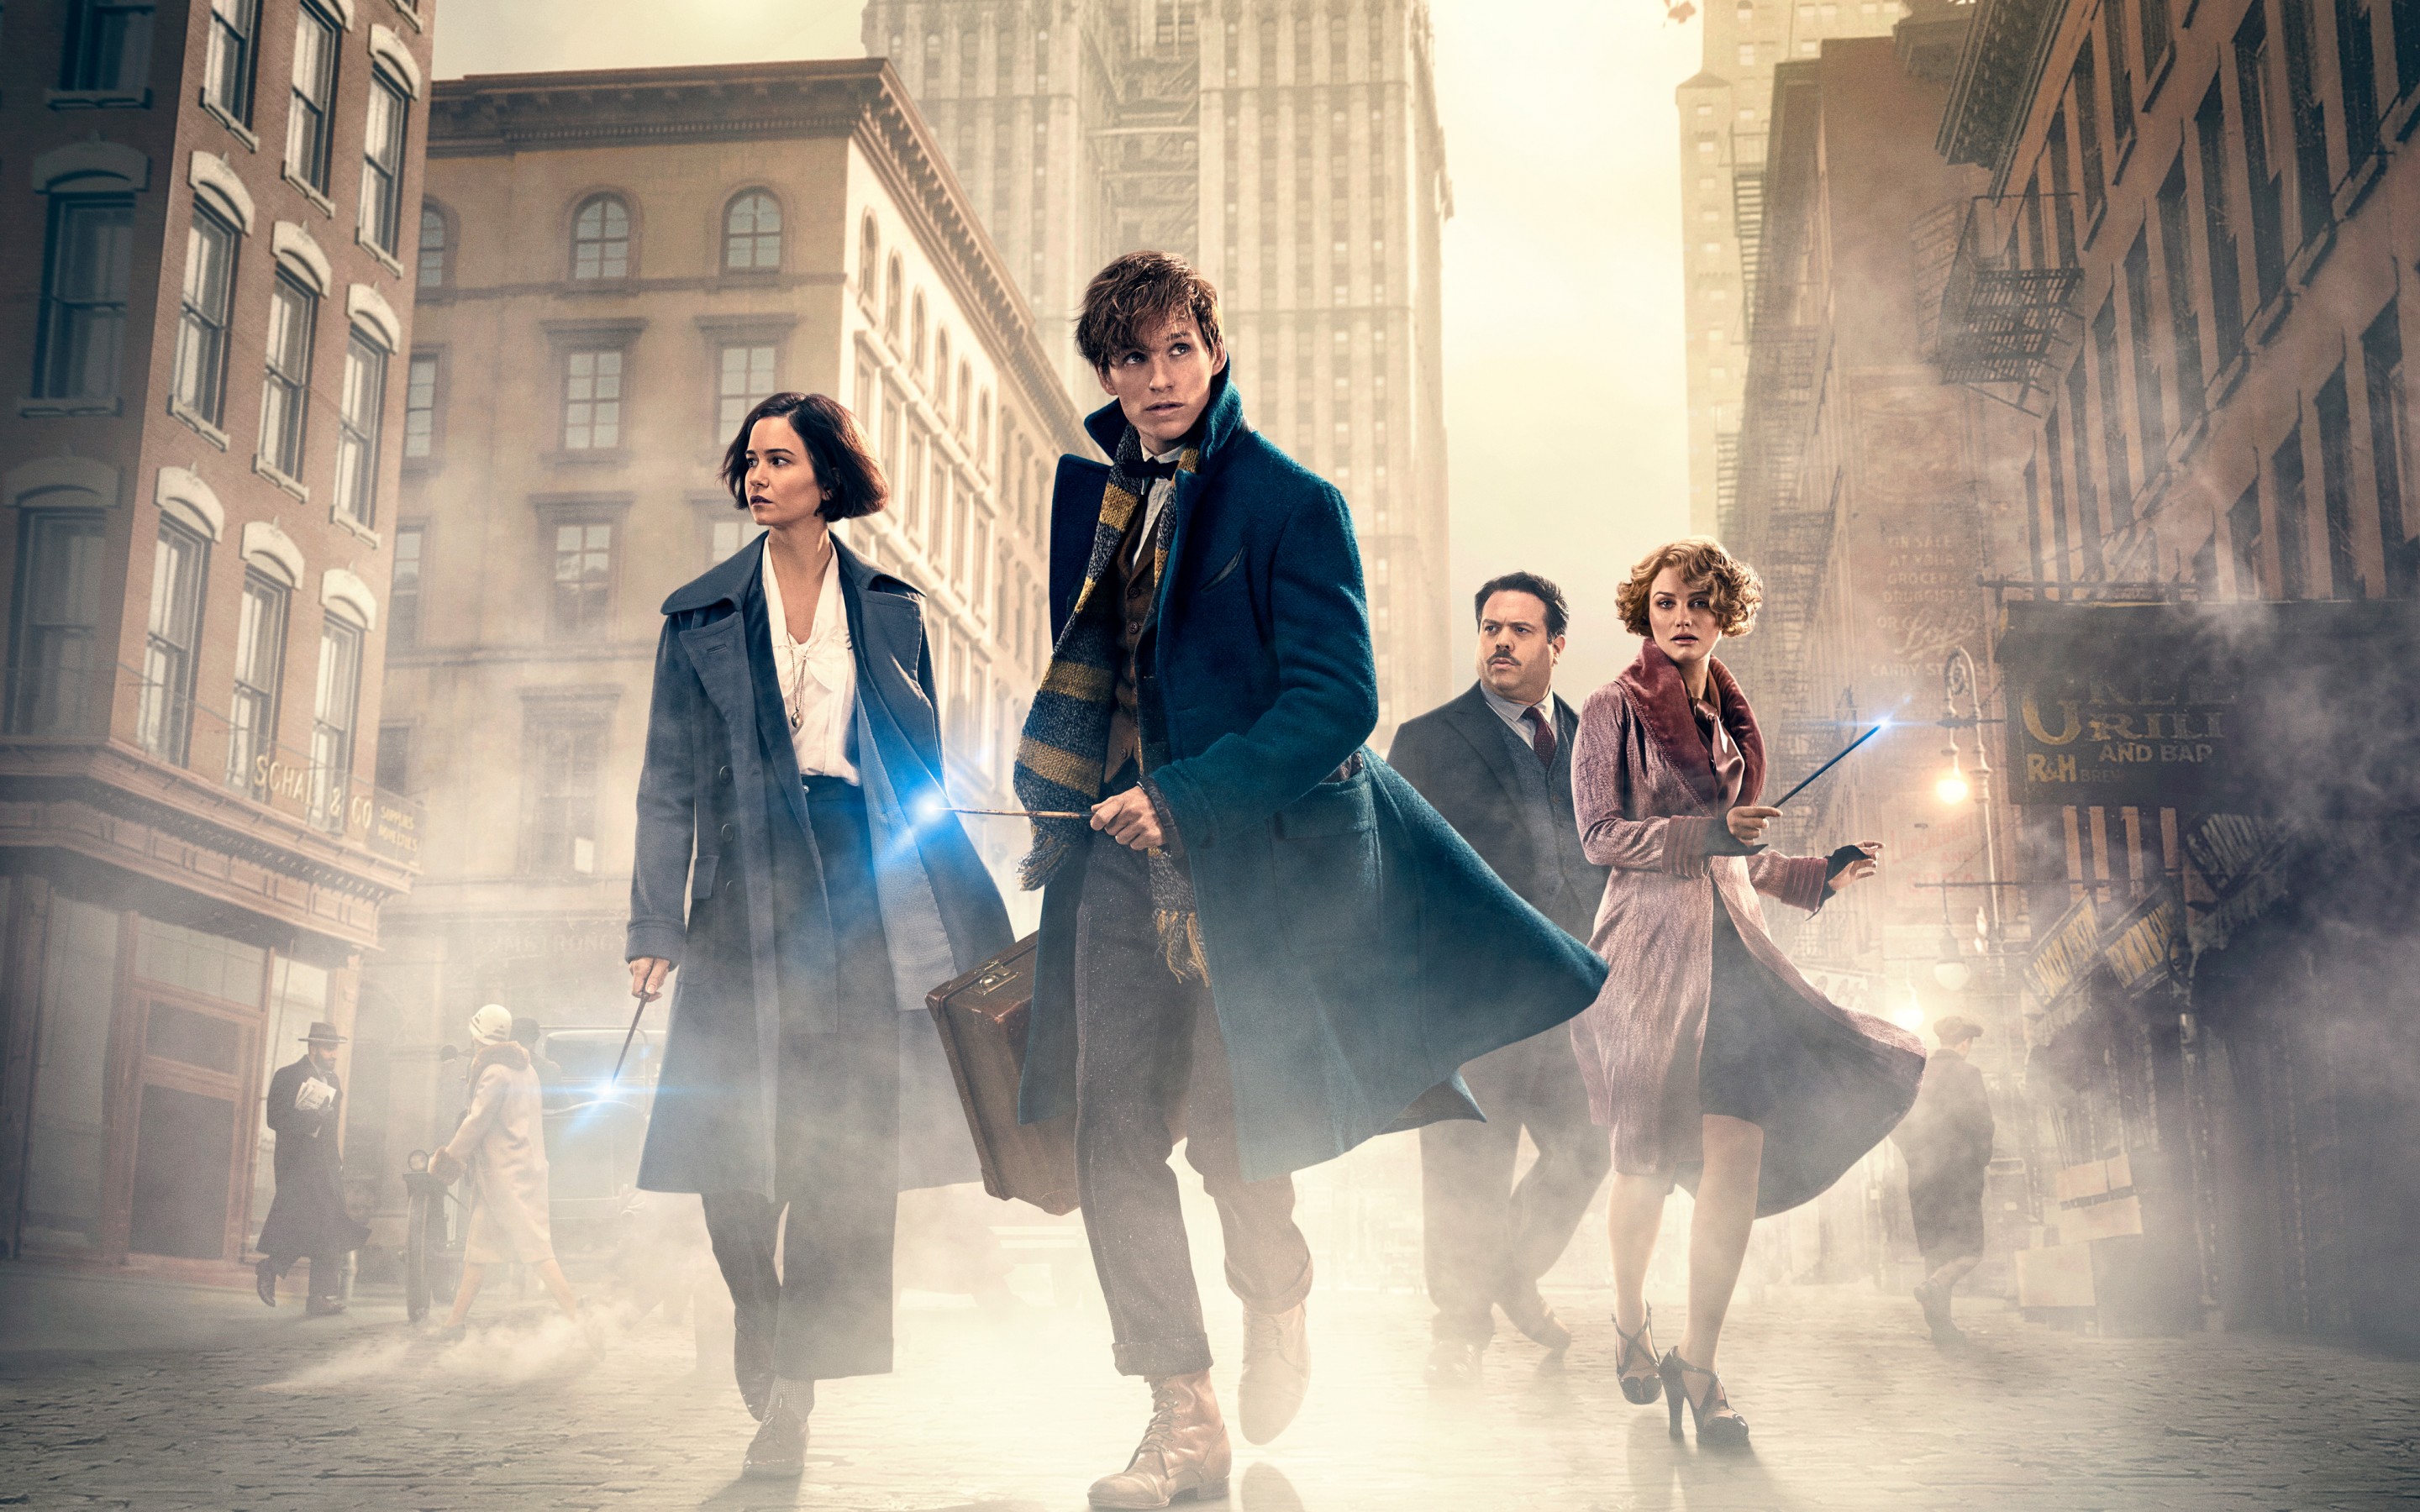 fantastic_beasts_and_where_to_find_them_5k-2880x1800_Courtesy_WarnerBrosPics.jpg